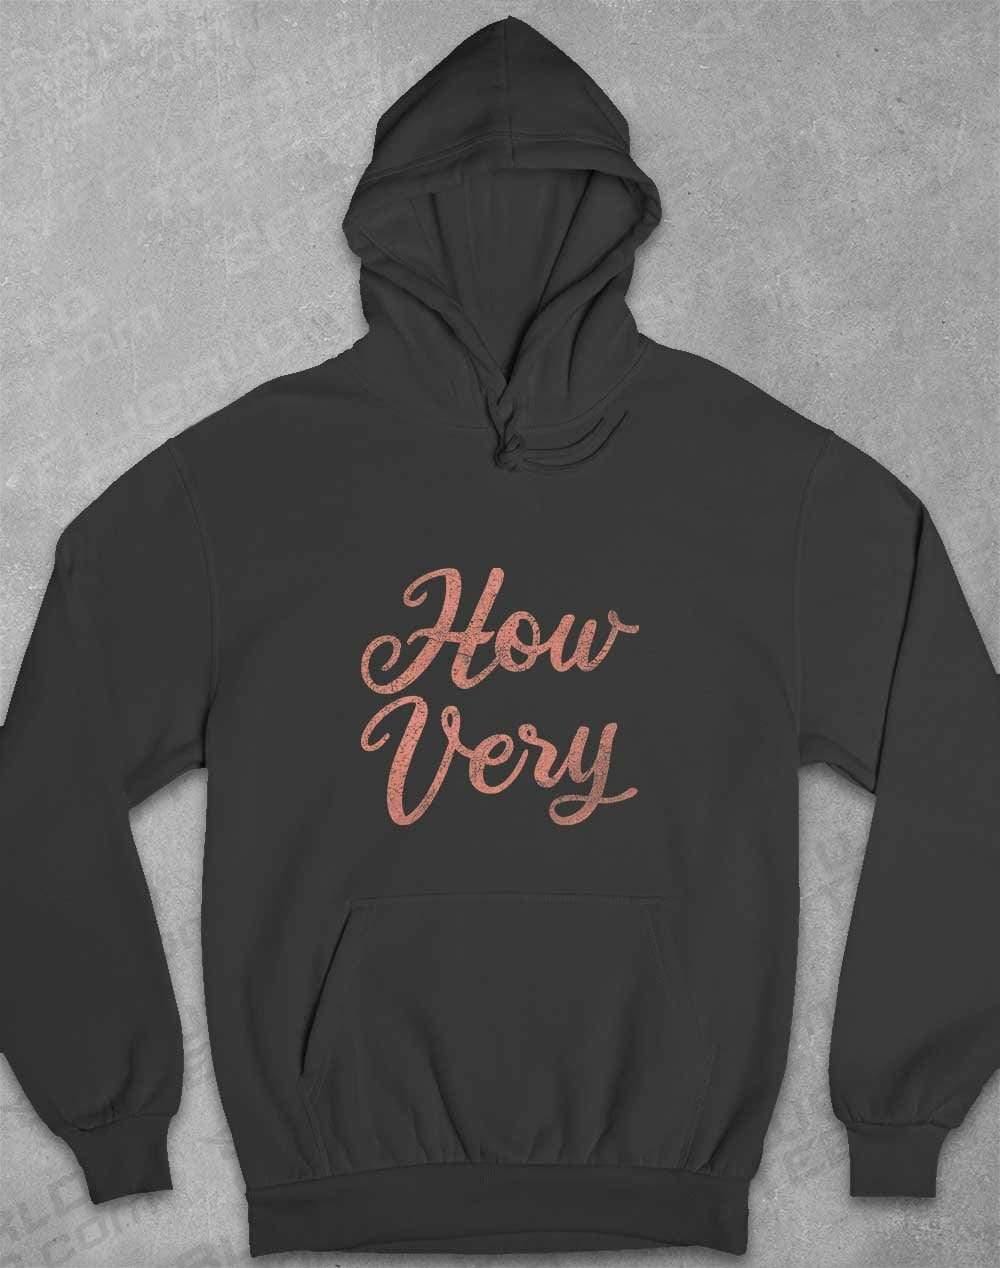 How Very Hoodie XS / Charcoal  - Off World Tees